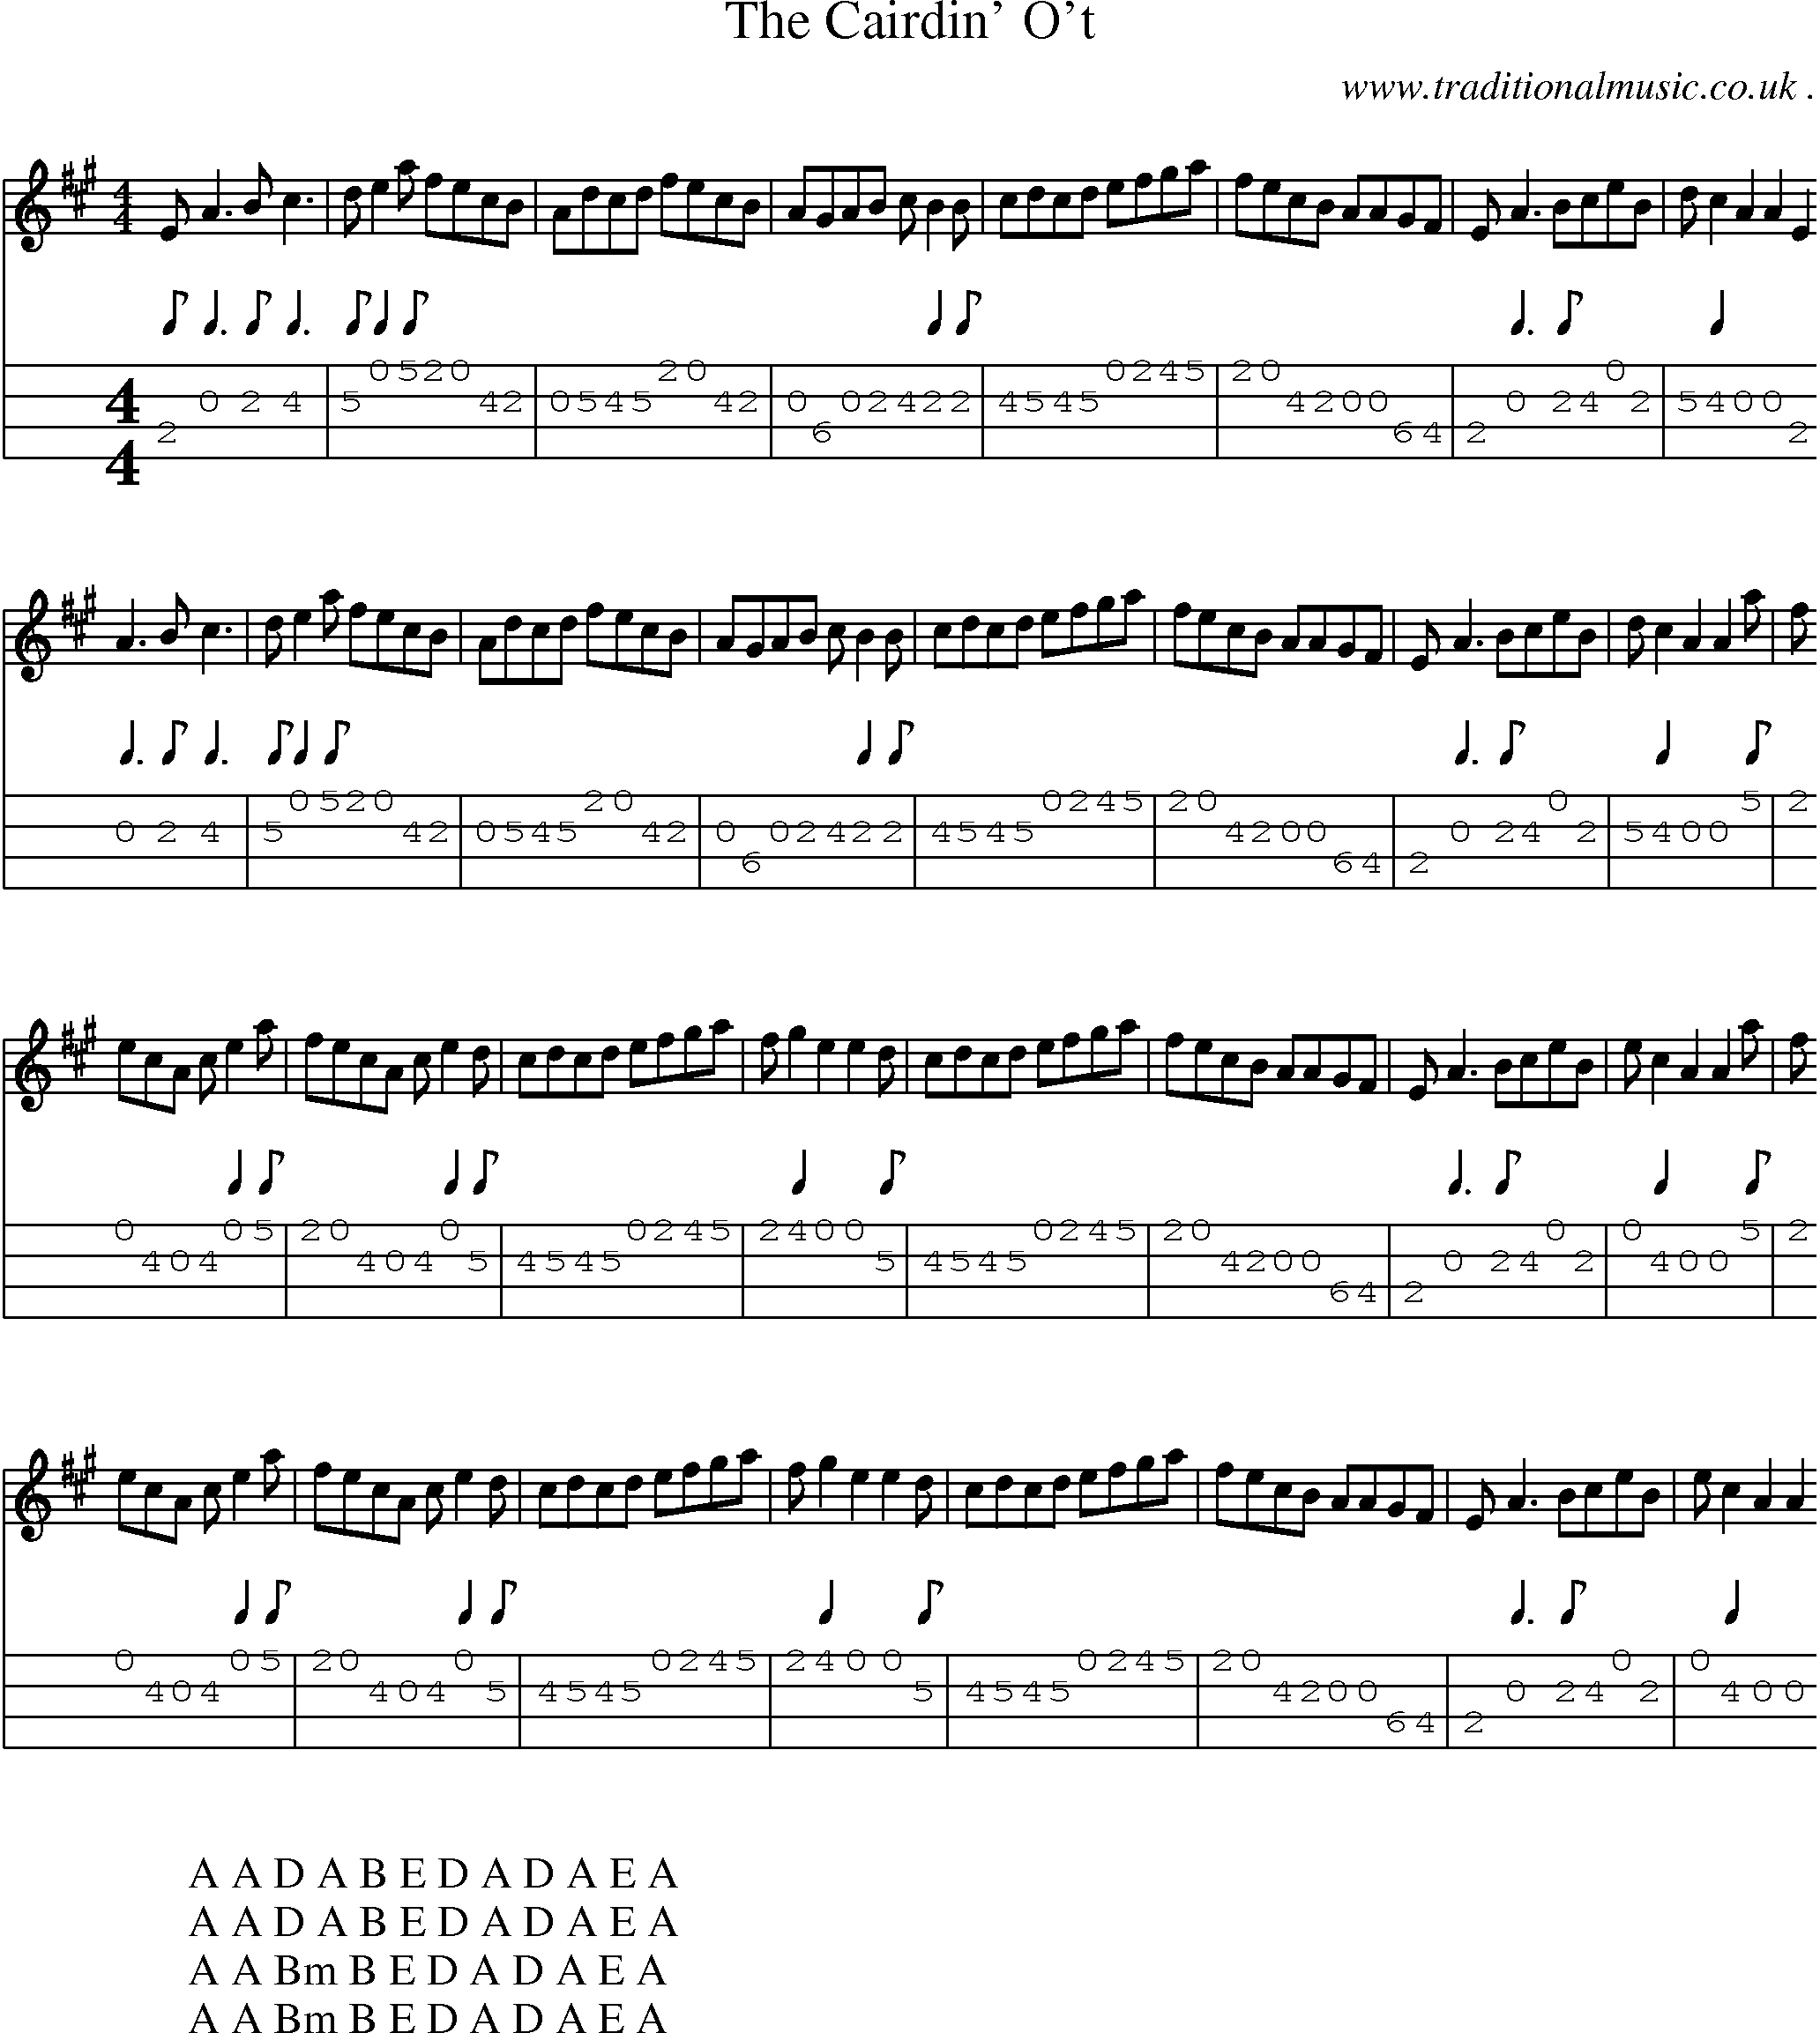 Sheet-music  score, Chords and Mandolin Tabs for The Cairdin Ot